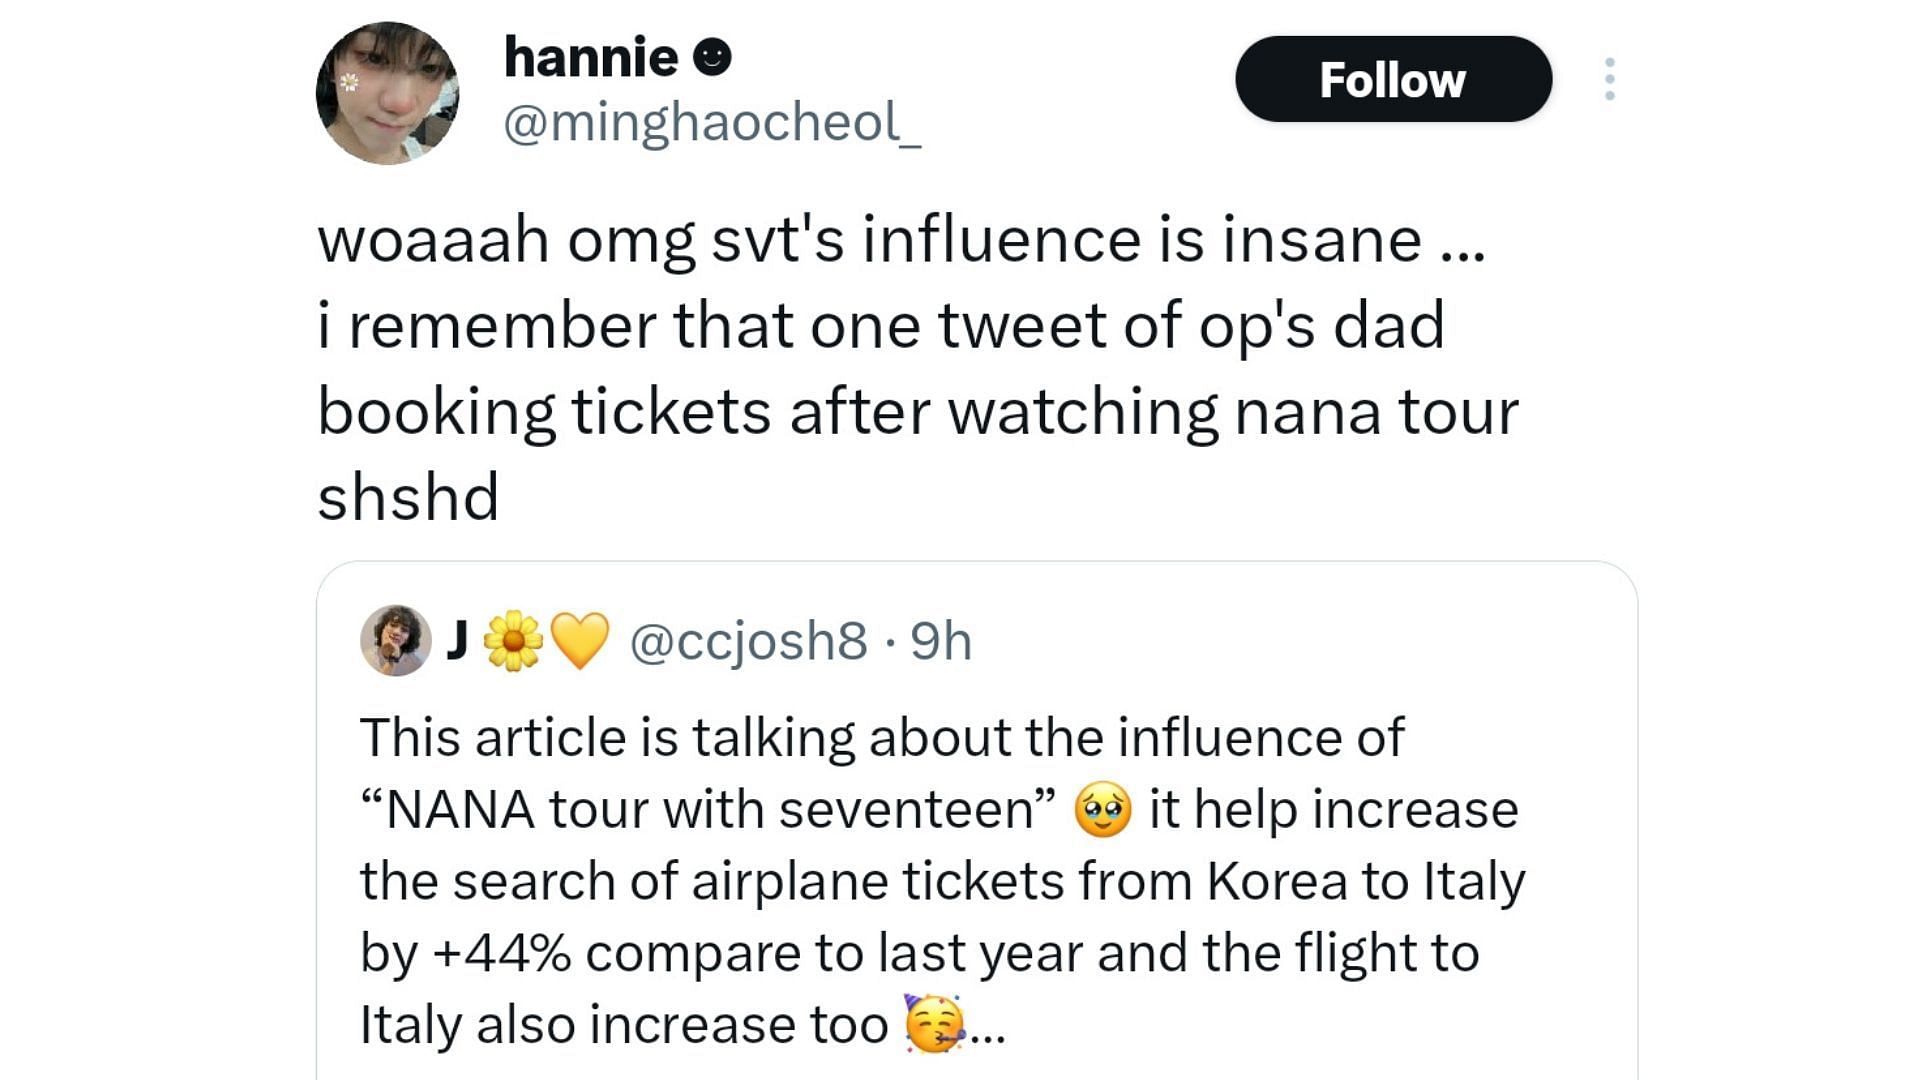 Fans react as NANA TOUR with SEVENTEEN increases flight ticket search from Korea to Italy (Image Via X/@minghaocheol_)